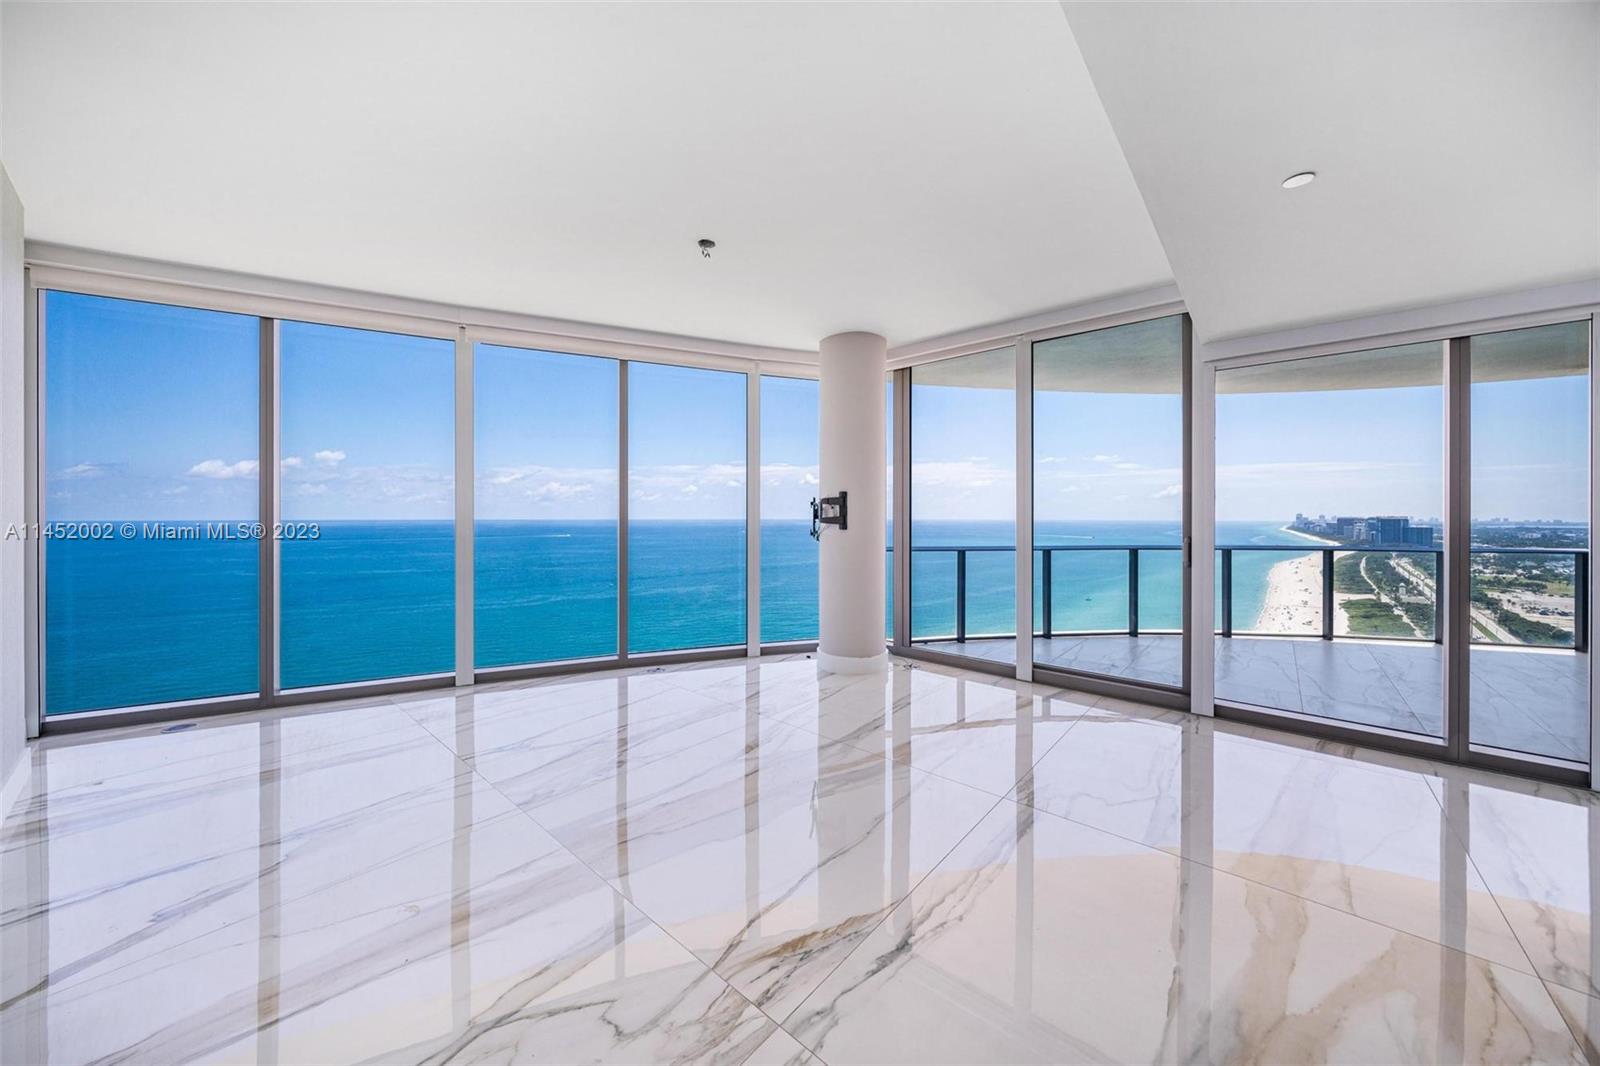 Beautiful 05 Line Residence at the Prestigious Ritz Carlton Sunny Isles Beach! Enjoy this spectacular Spectacular 4 bed, 5.5 bath with unobstructed views including: Direct Ocean, Intracoastal, Bay and the Miami Skyline. The Ritz-Carlton Residences includes a full range of amenities such as a state-of-the-art gym, spa, hair salon, private treatment rooms, kids club, pool bar, and restaurant. Must See!